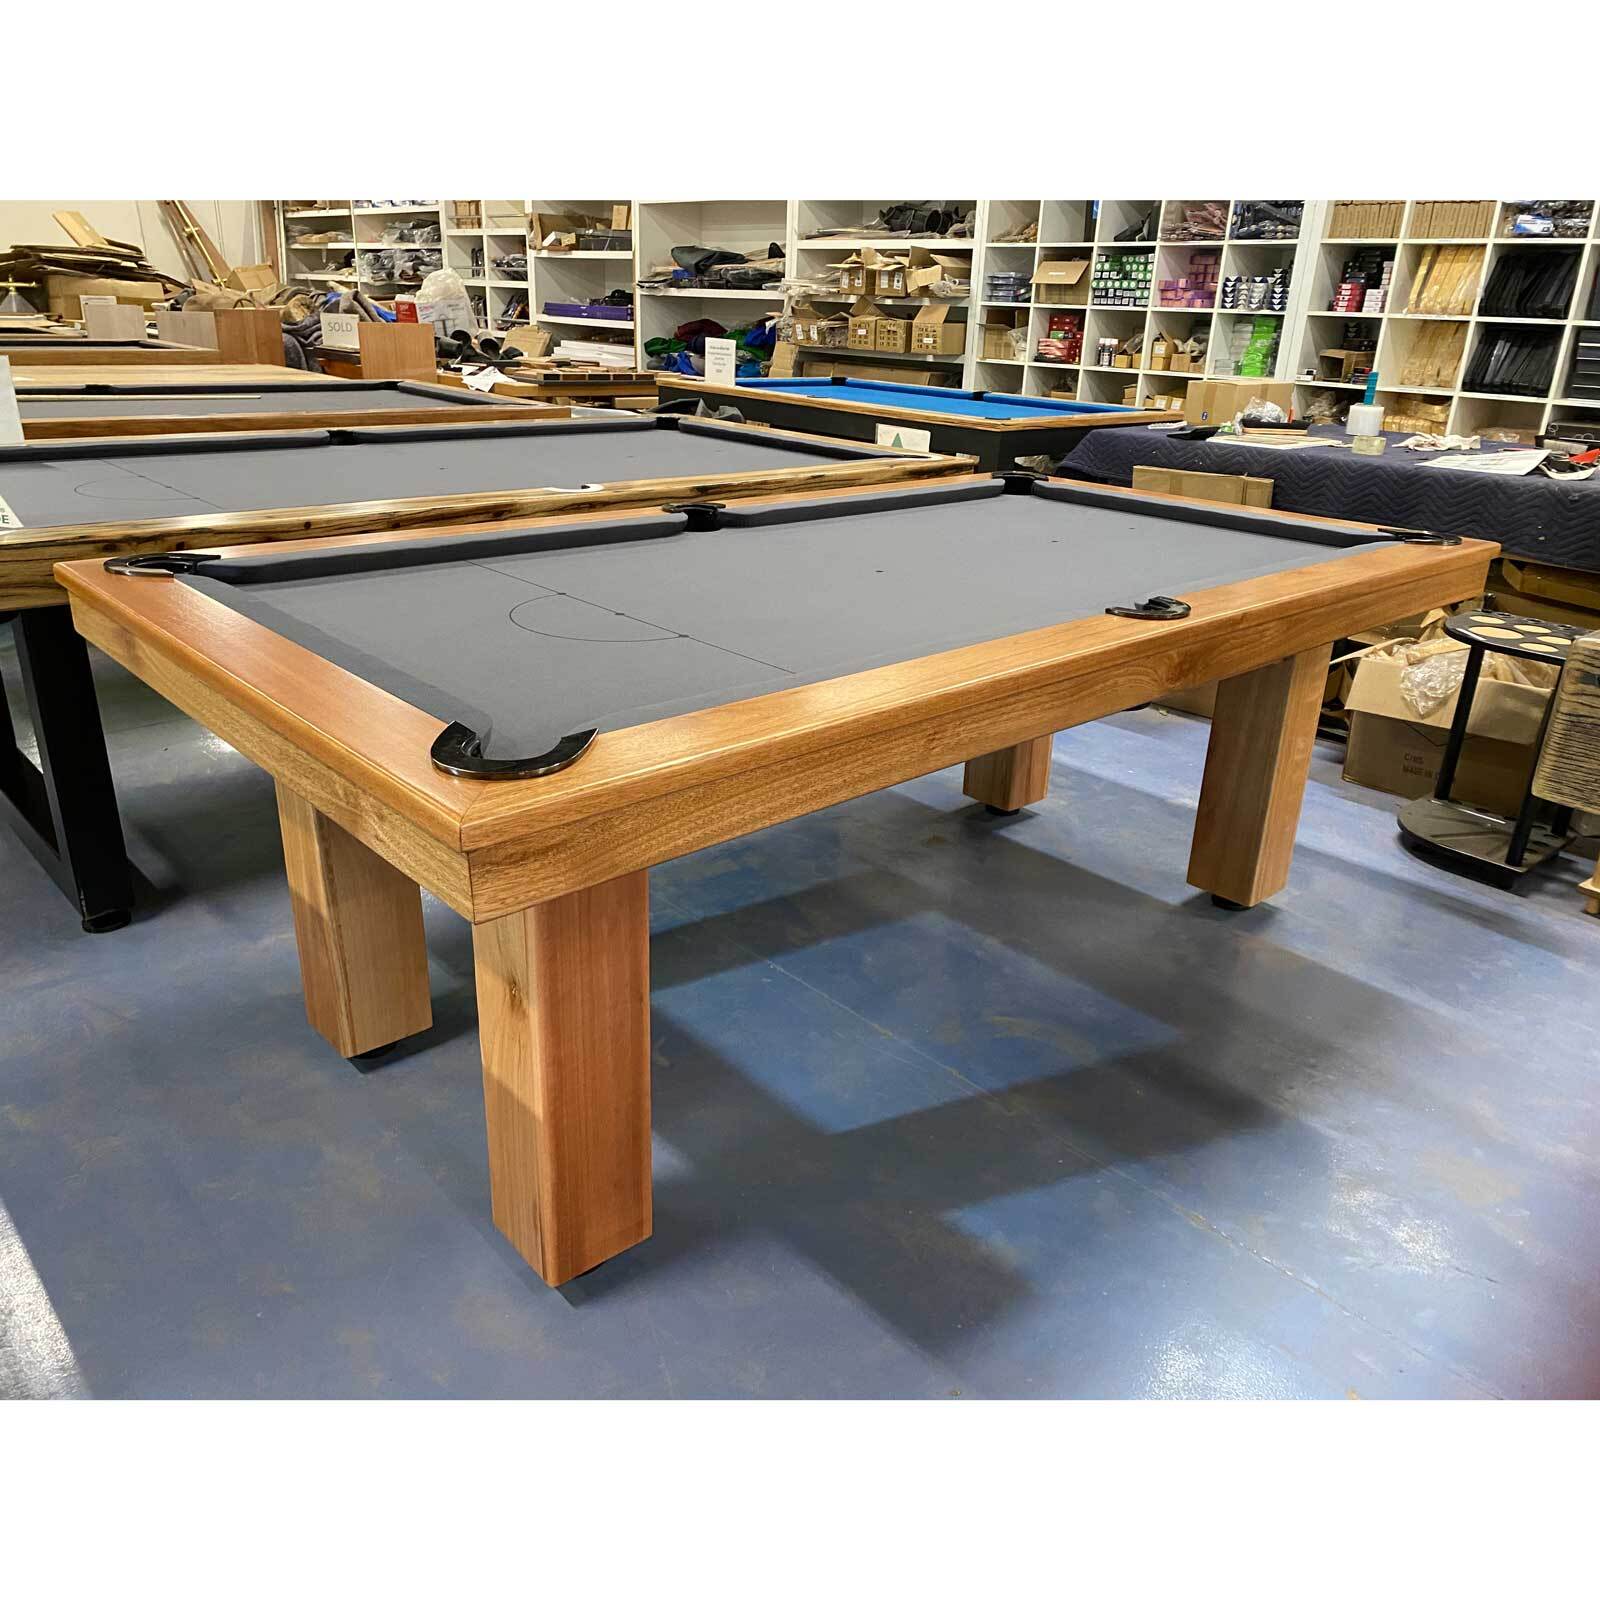 PRE-MADE 7 Foot Slate regent billiards table with Grandis Timber